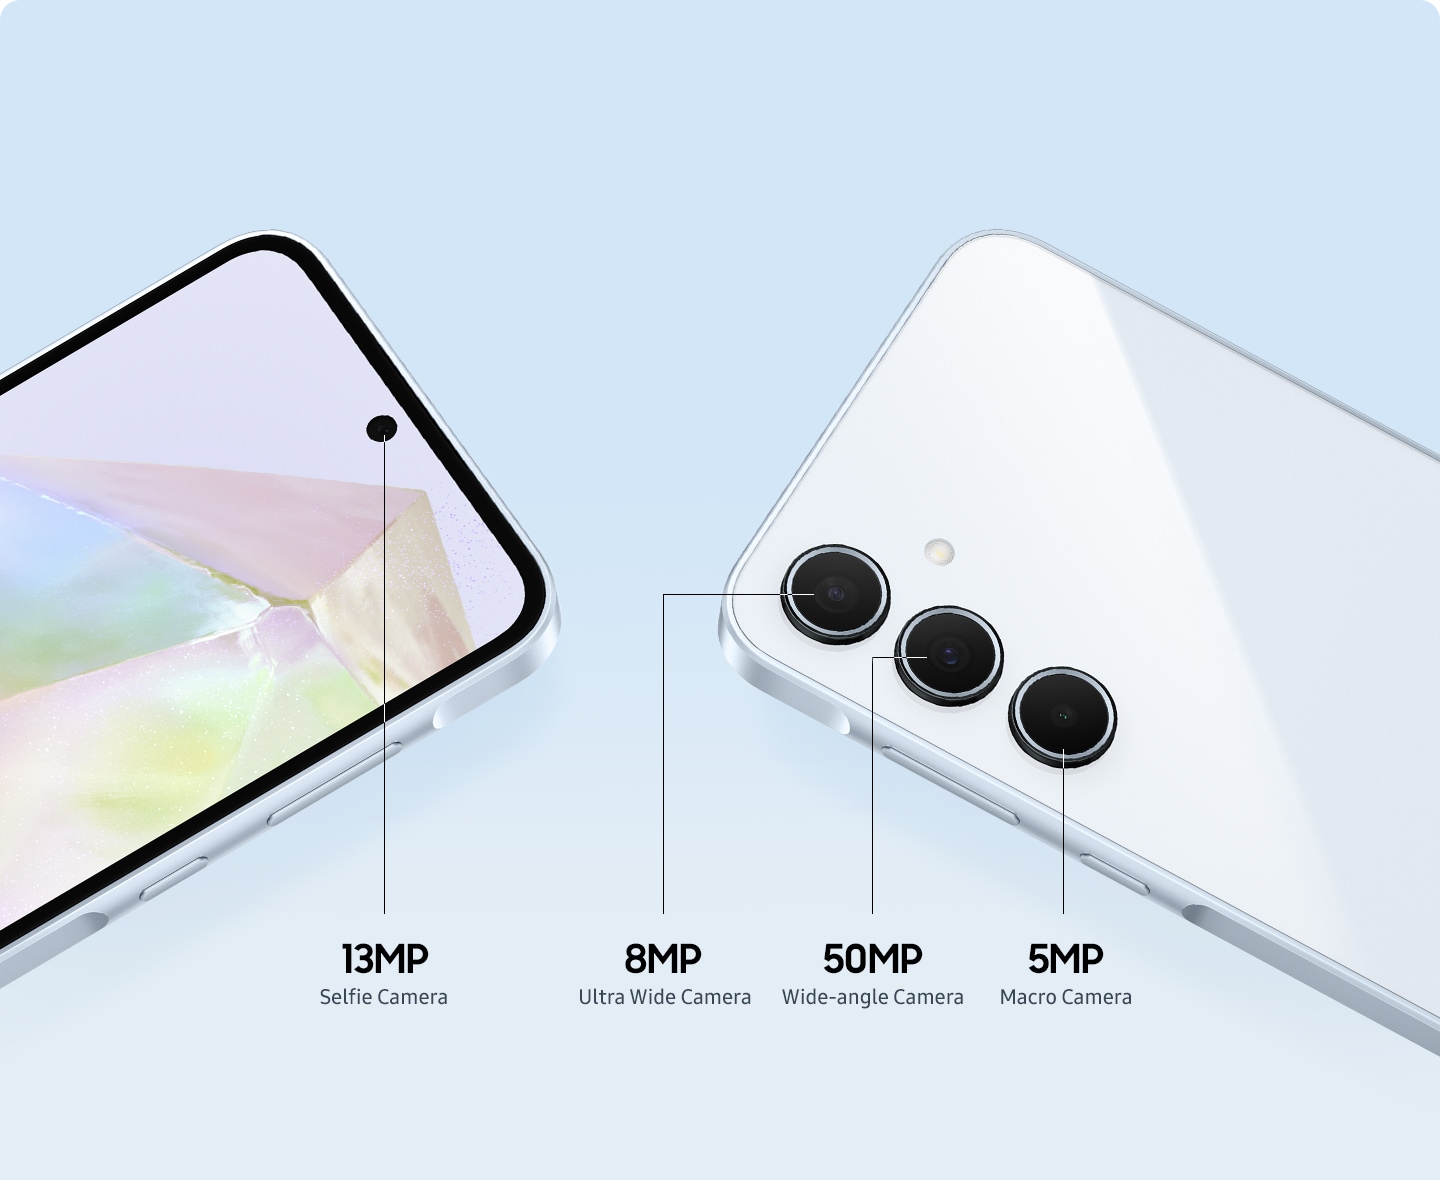 Close-up of the upper section of two smartphones are showing the front-facing 13MP selfie camera, a 8MP Ultra-Wide Camera, a 50MP Wide-angle Camera, and a 5MP Macro Camera.